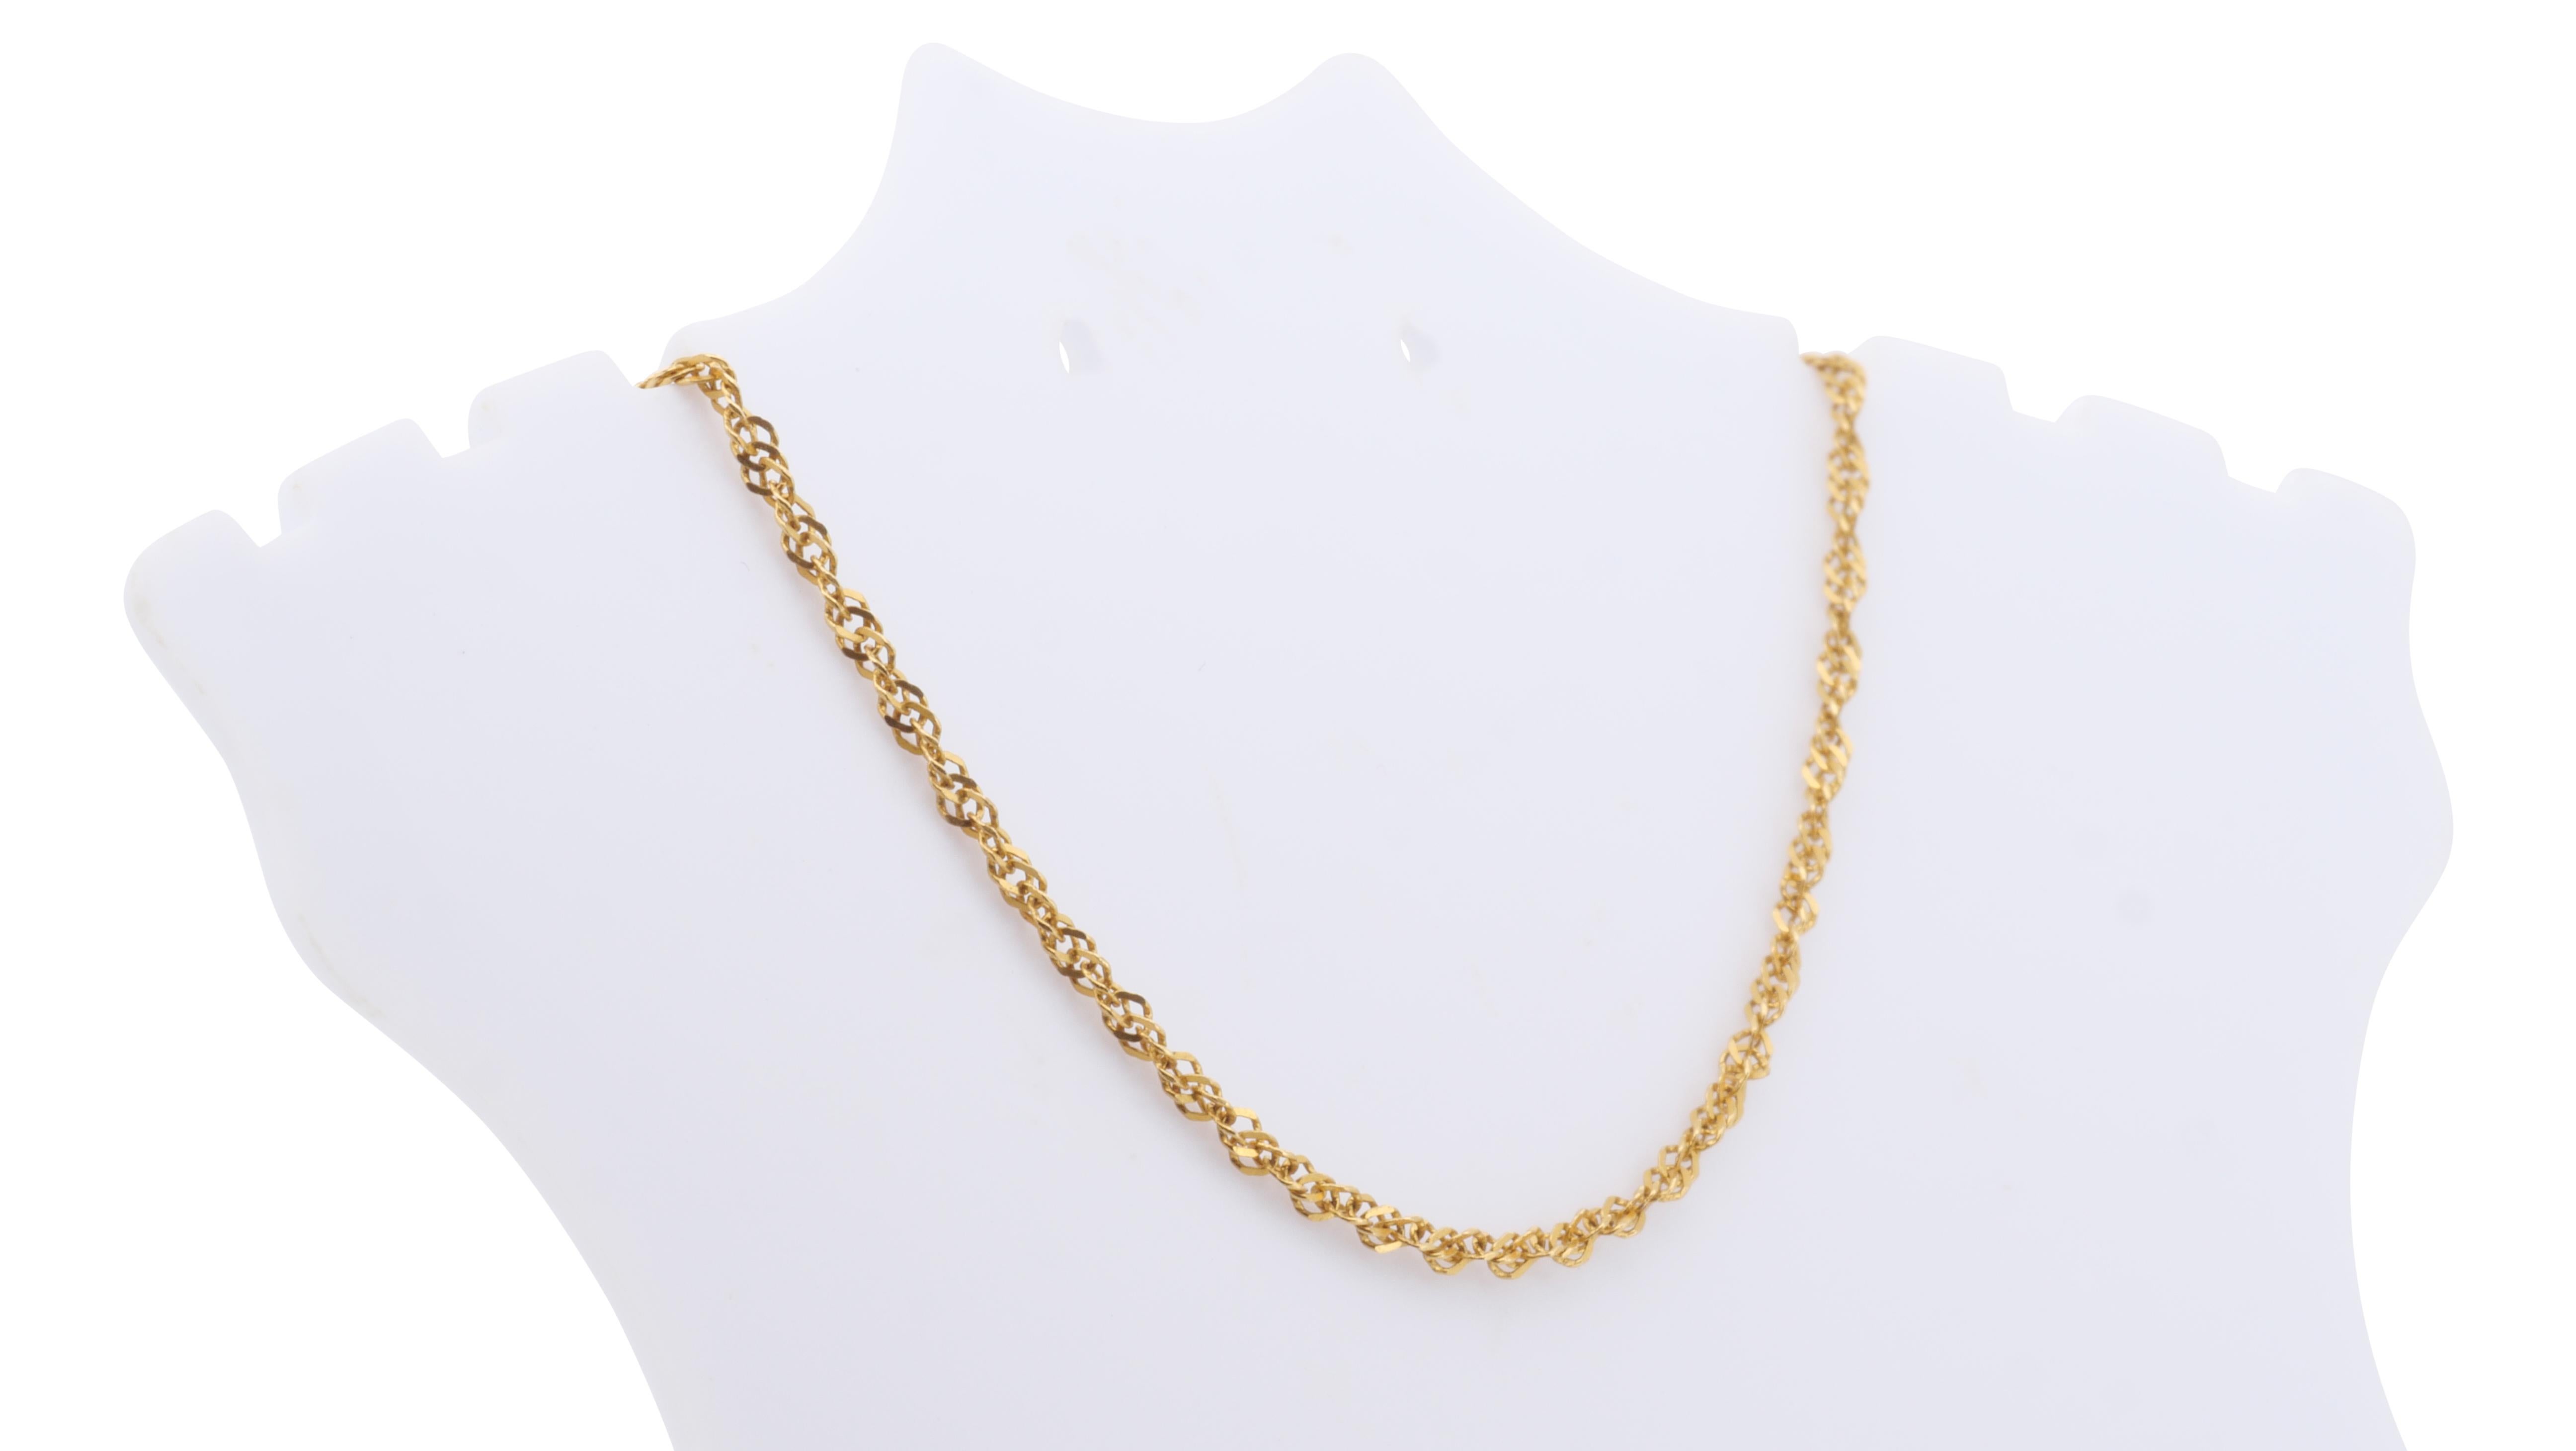 Women's High Quality 14k Yellow Gold Chain For Sale